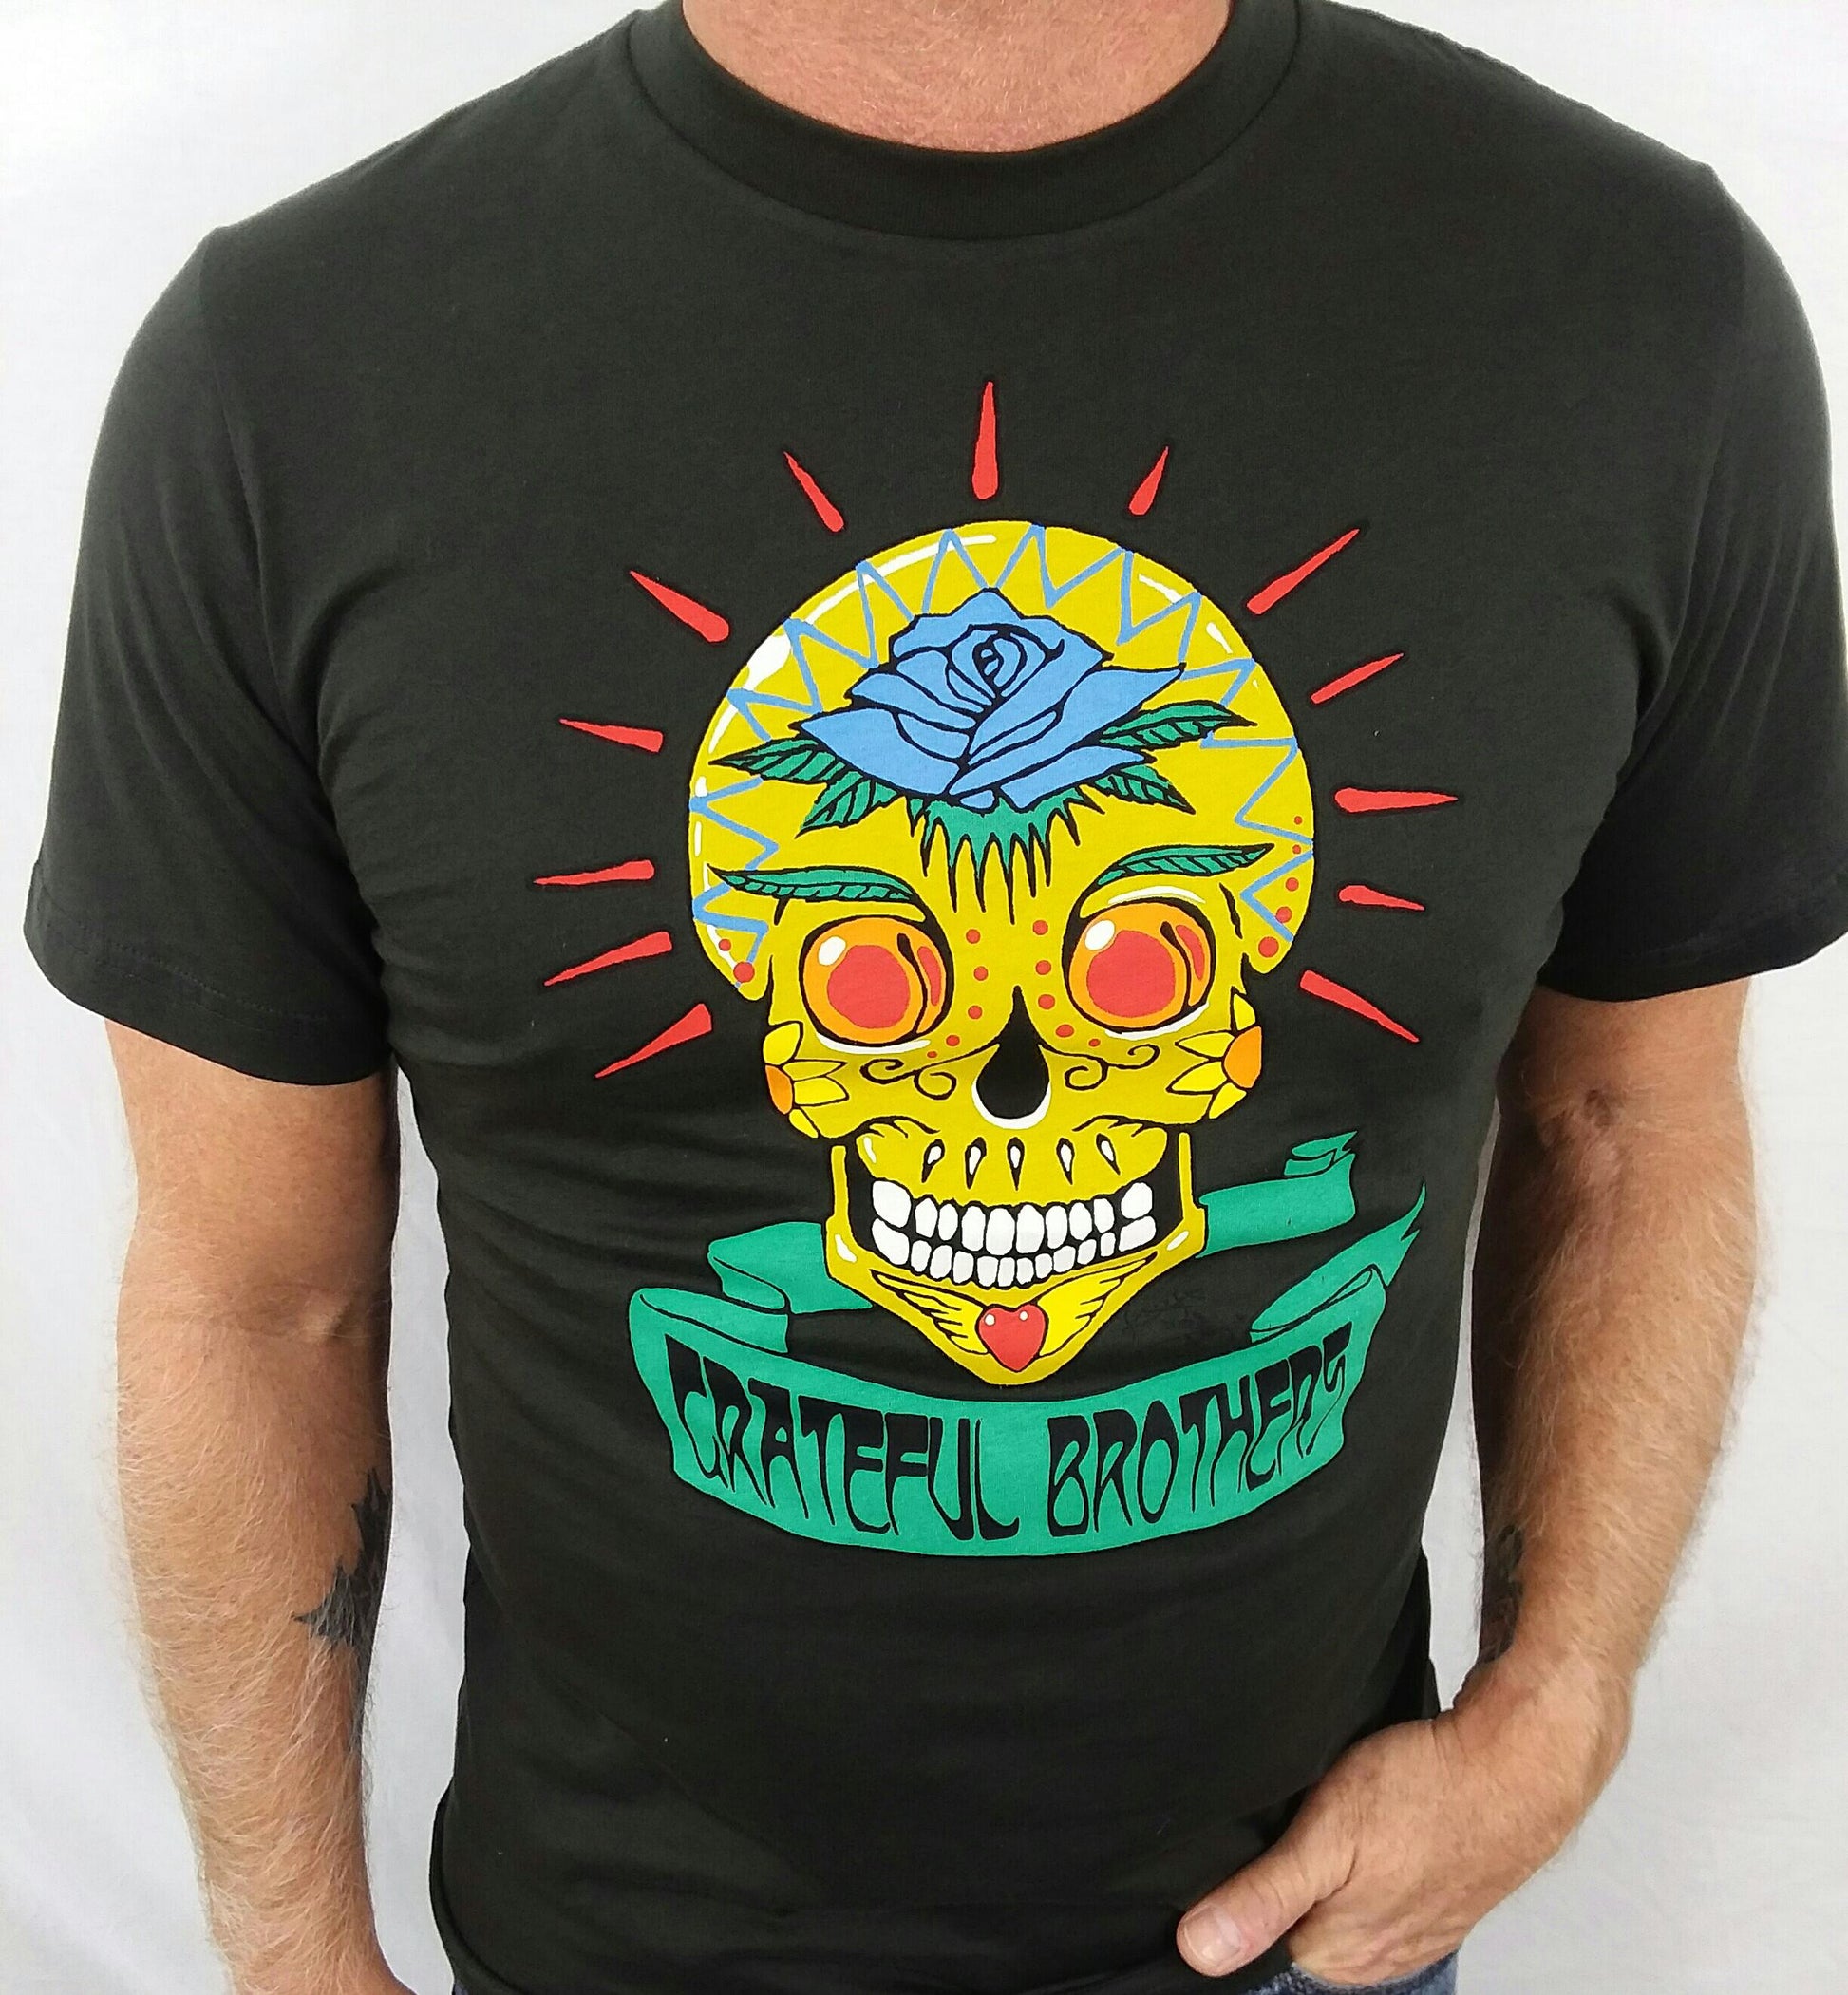 The Grateful Brothers black skull t-shirt on model organic band merch made in america blue rose music